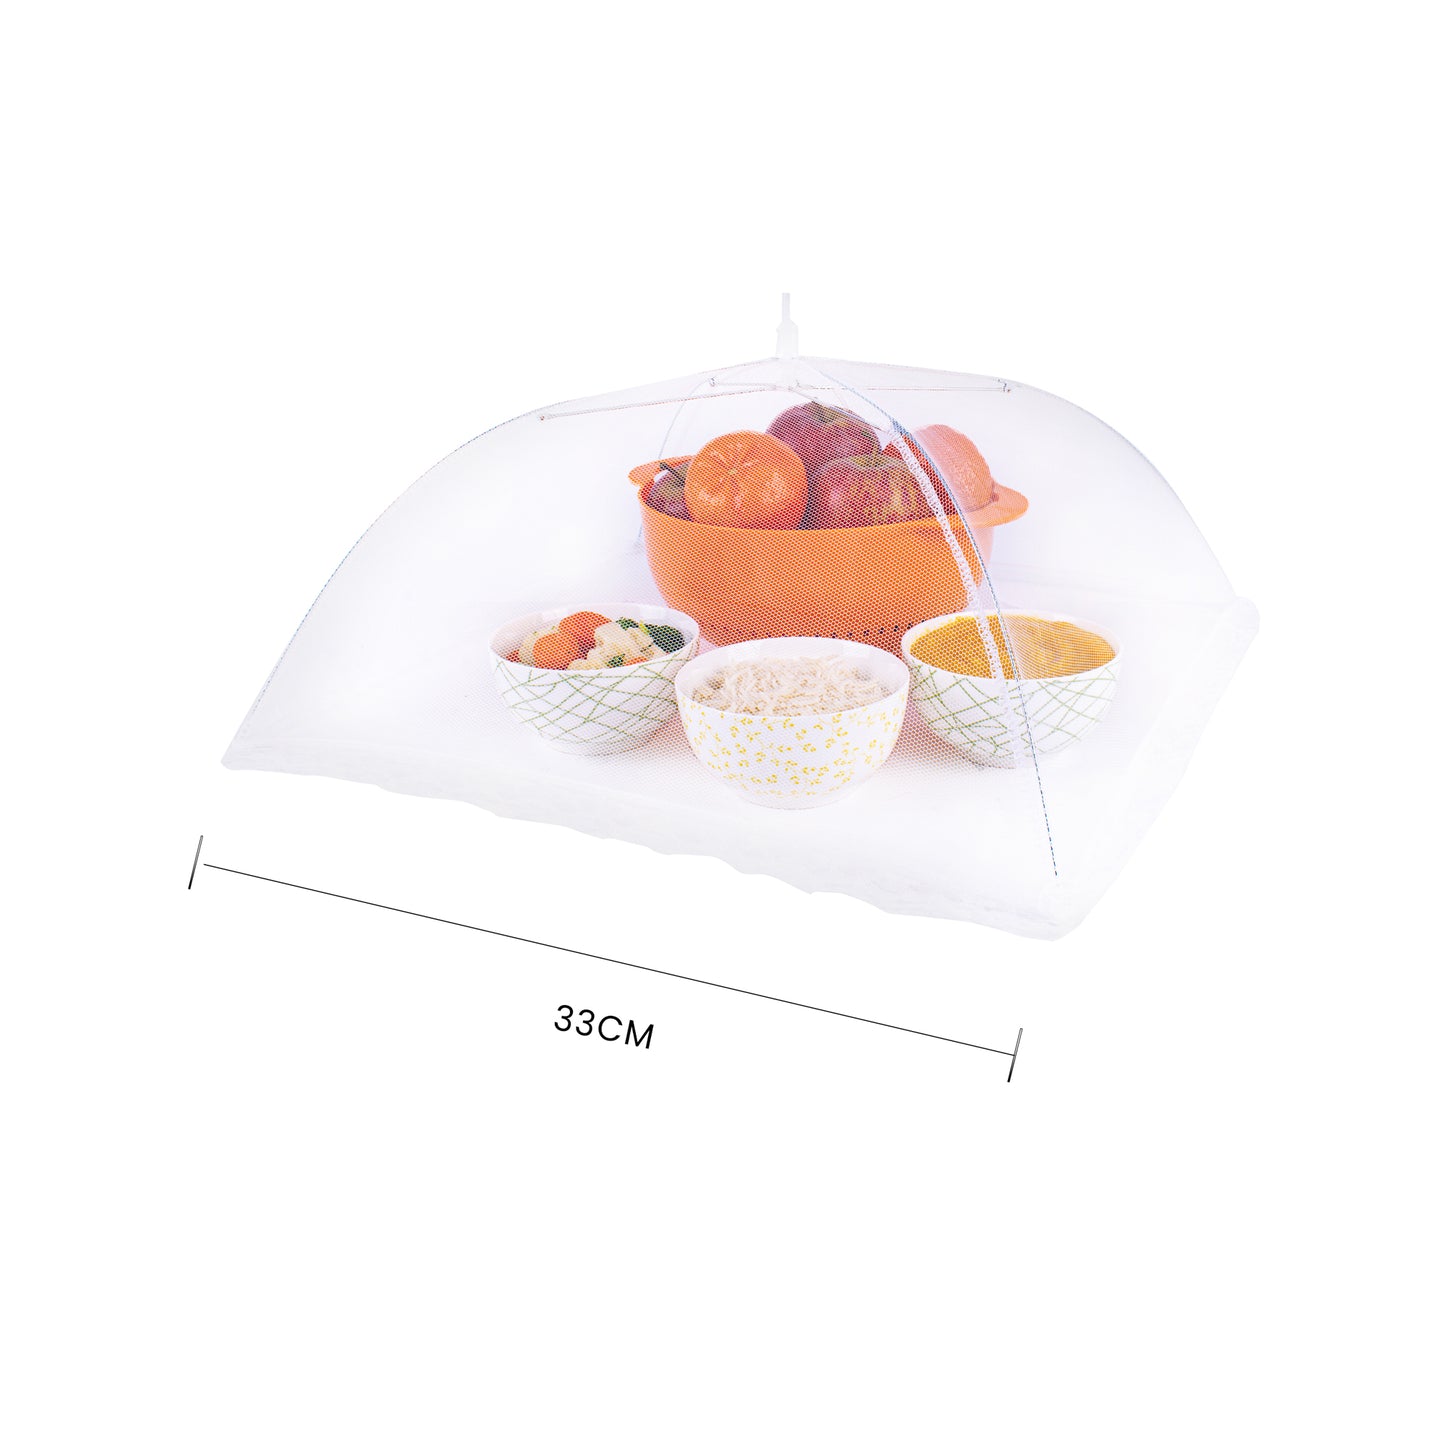 33cm Square Pop-up Mesh Food Cover